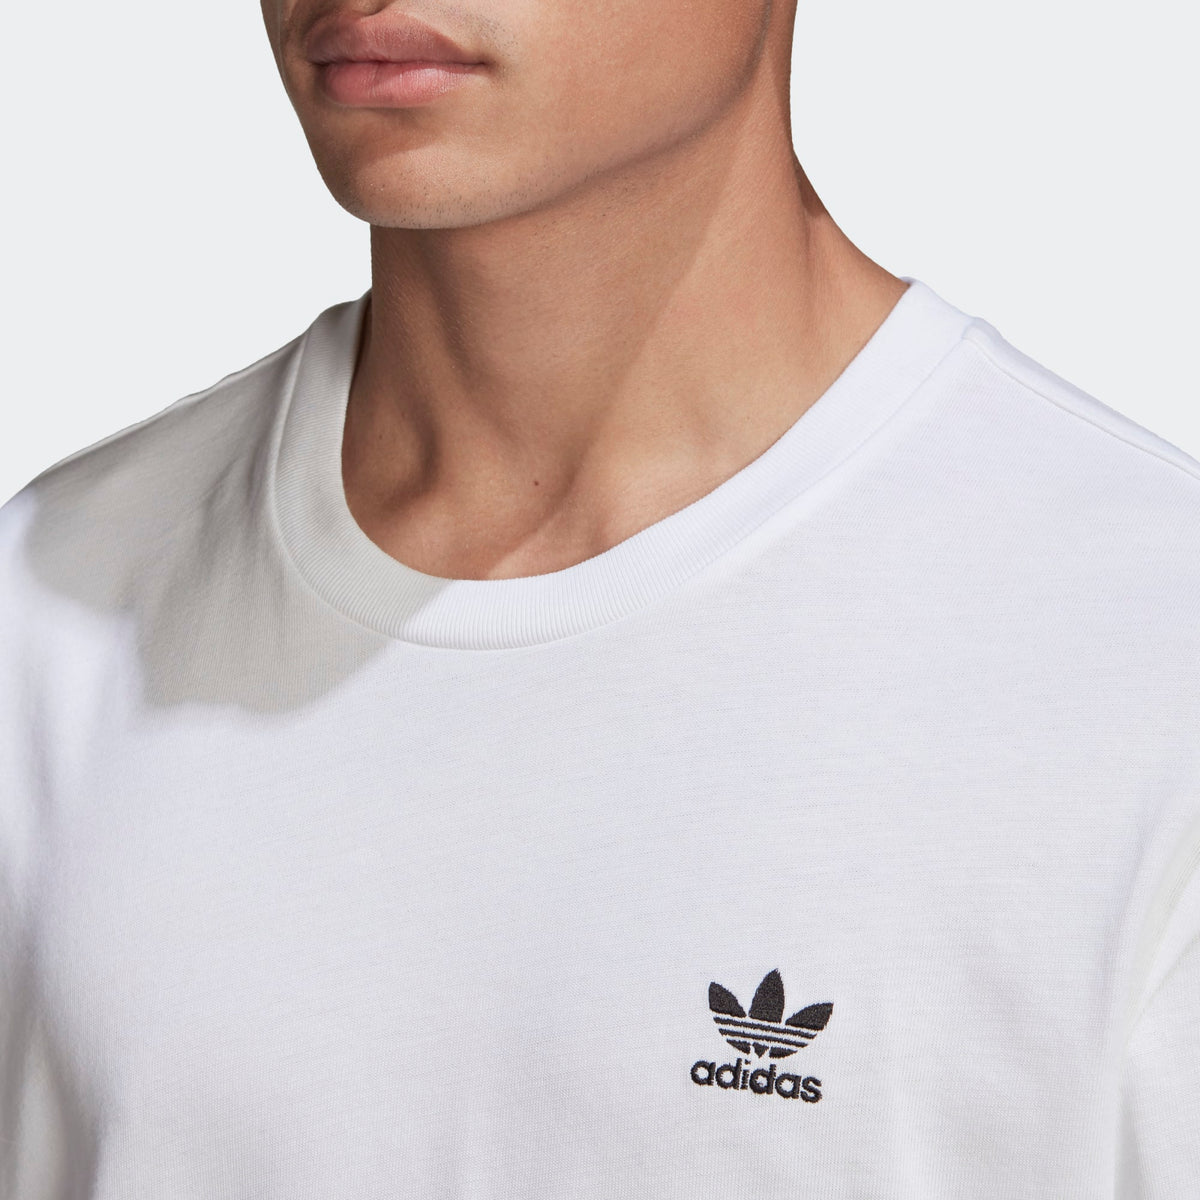 Adidas Adicolor Embroidered – PH Tee Merch Trilogy Classics Logo (White)(GN3453) Boxy